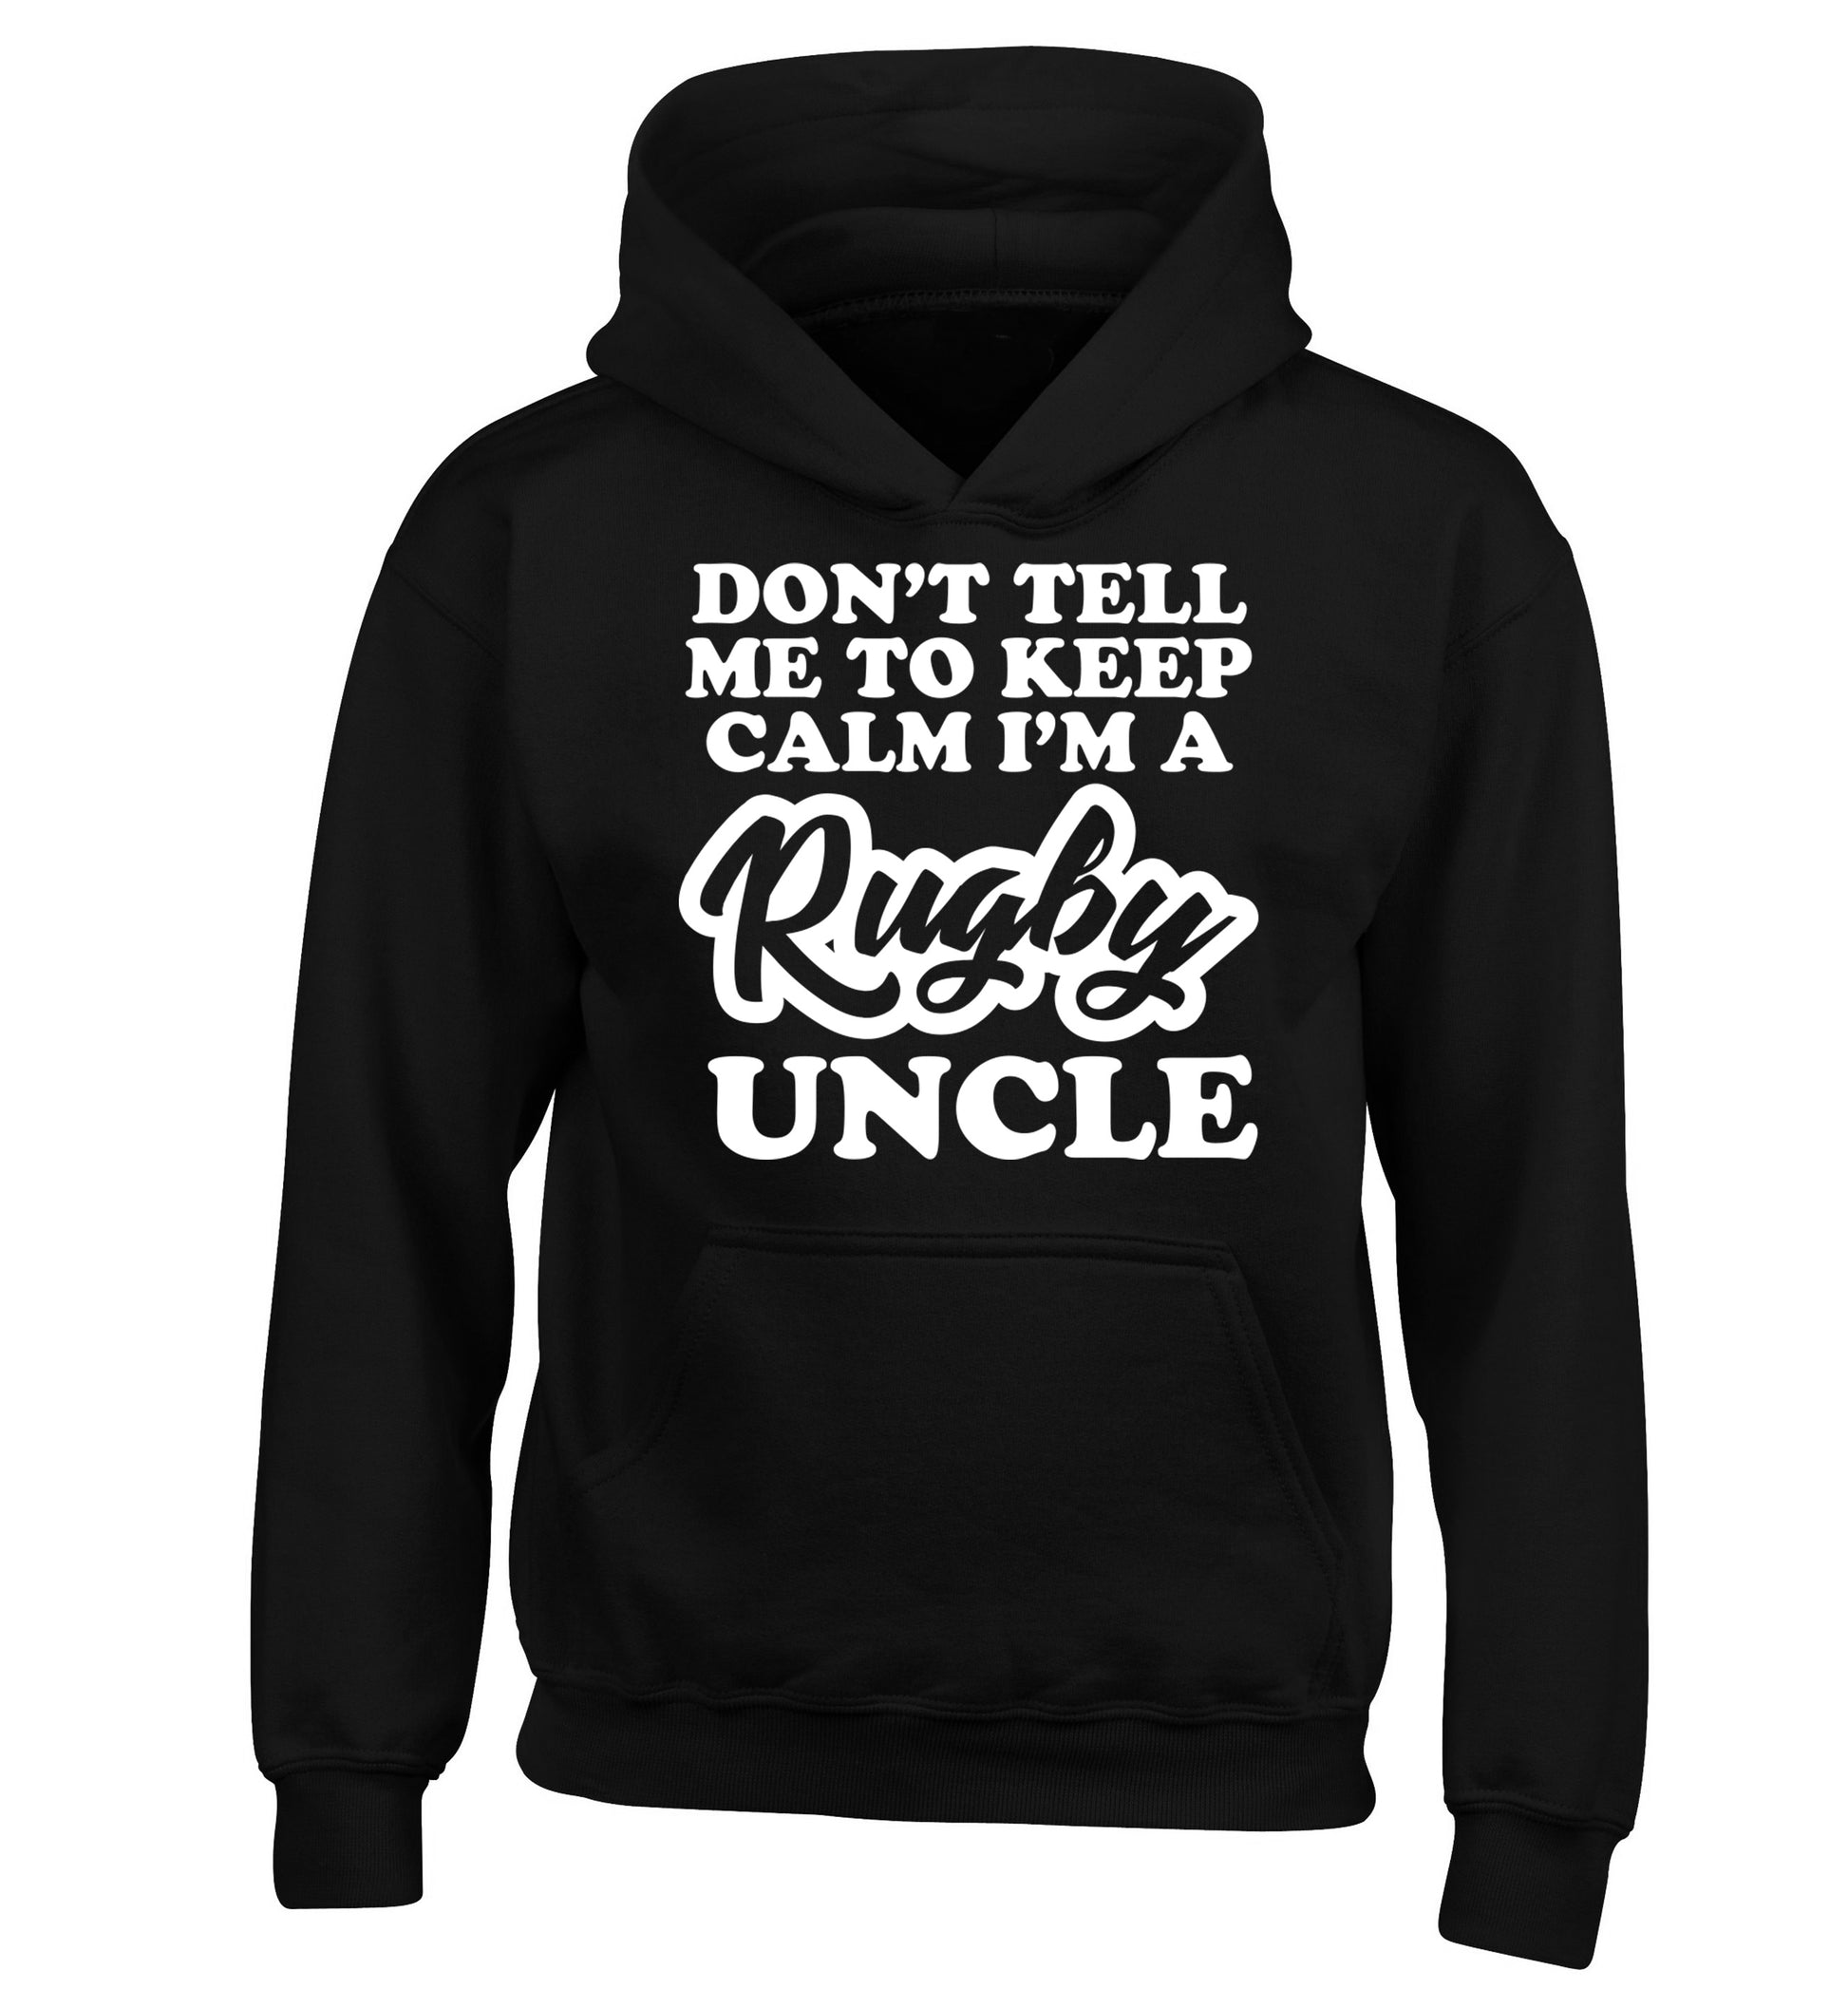 Don't tell me to keep calm I'm a rugby uncle children's black hoodie 12-13 Years